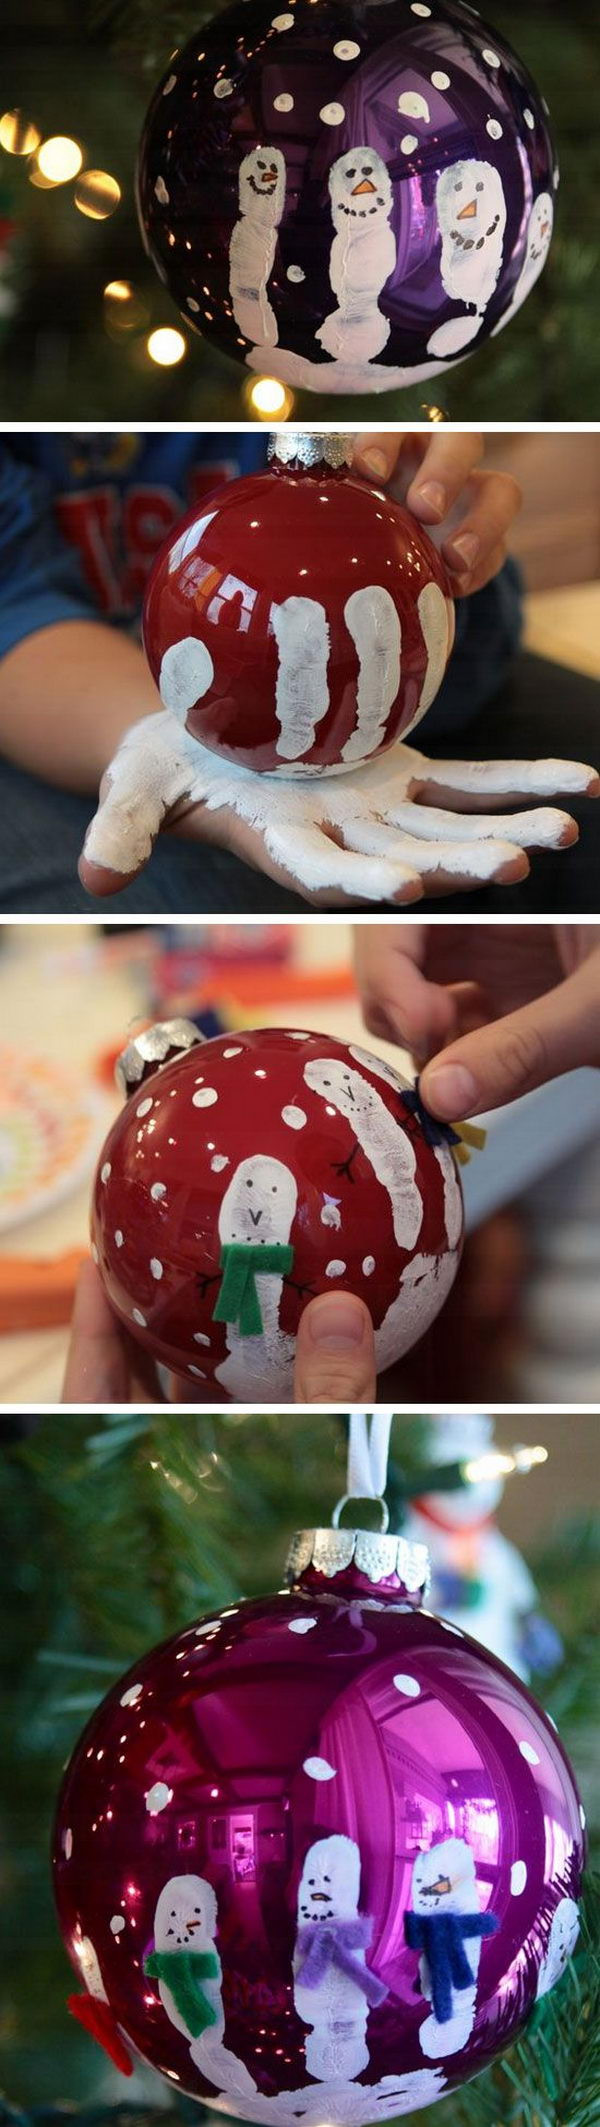 Toddler Christmas Craft Ideas
 Easy & Creative Christmas DIY Projects That Kids Can Do